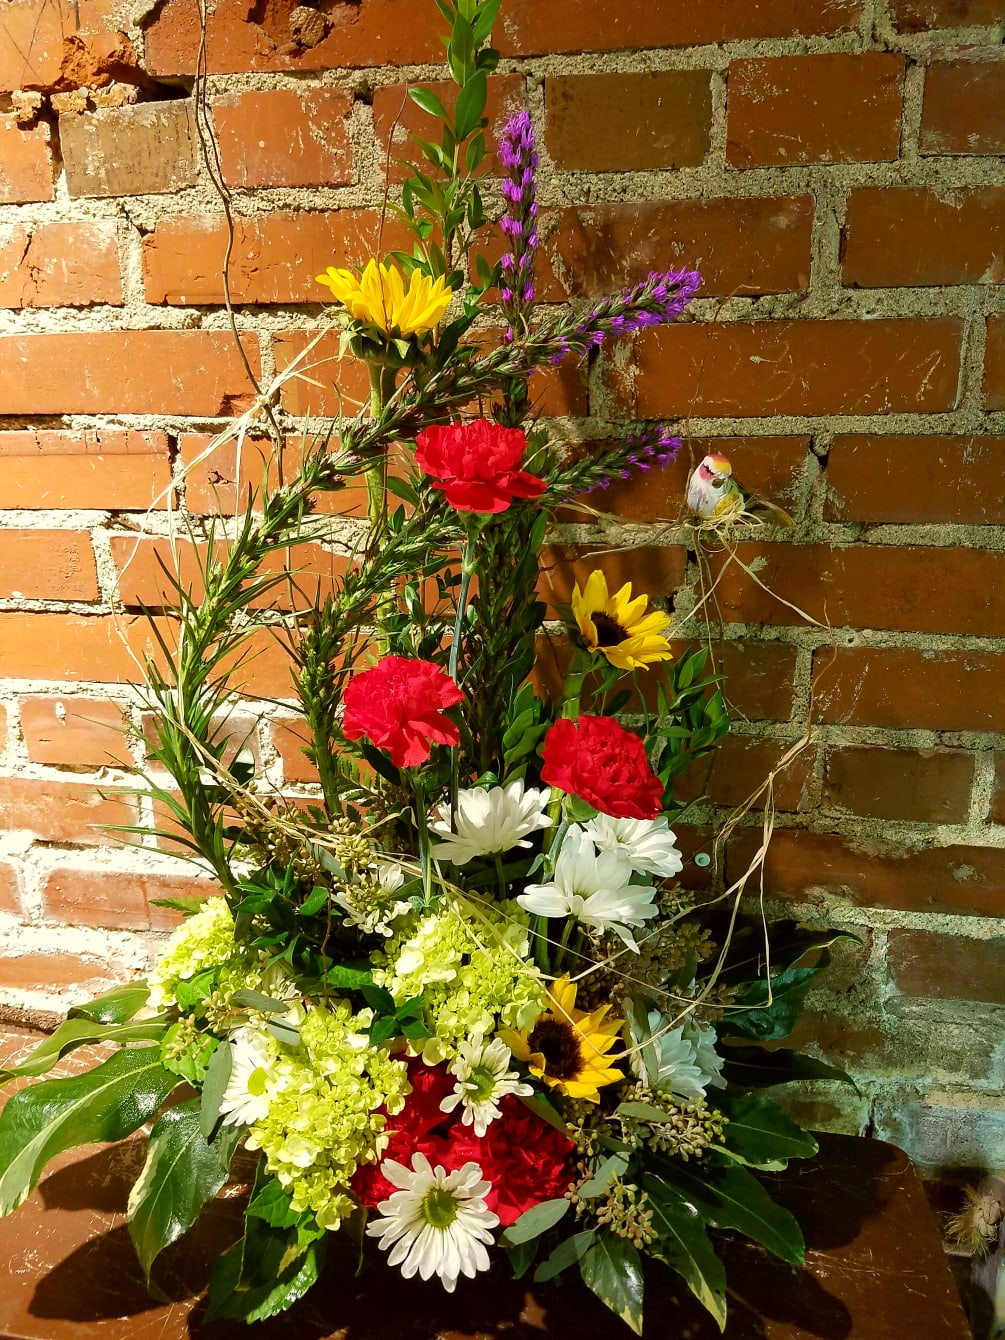 This bouquet includes hydrangeas, sunflowers, carnations, daisies, with liatris manipulated to give